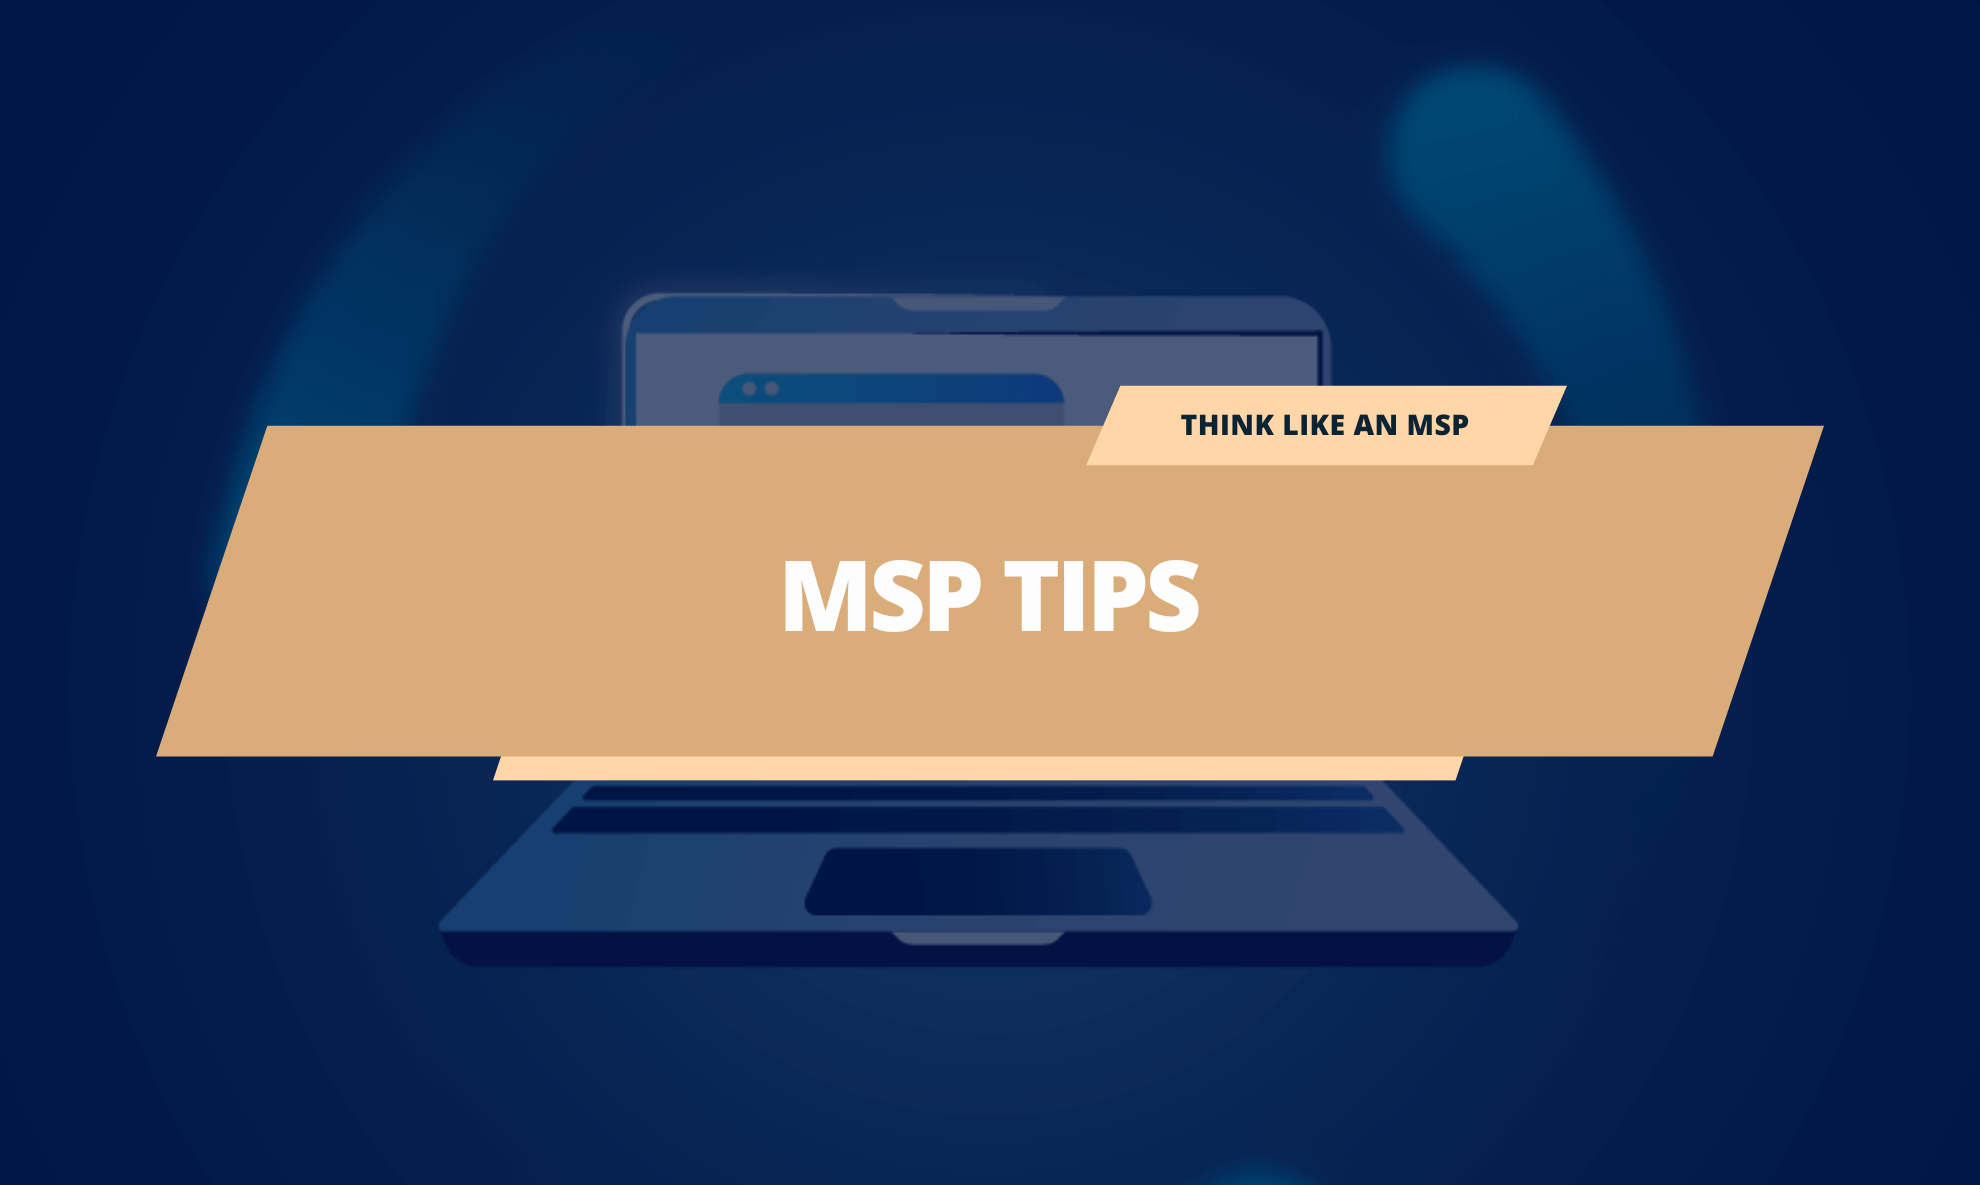 5 Tips to Help You Meet Your MSP Goals